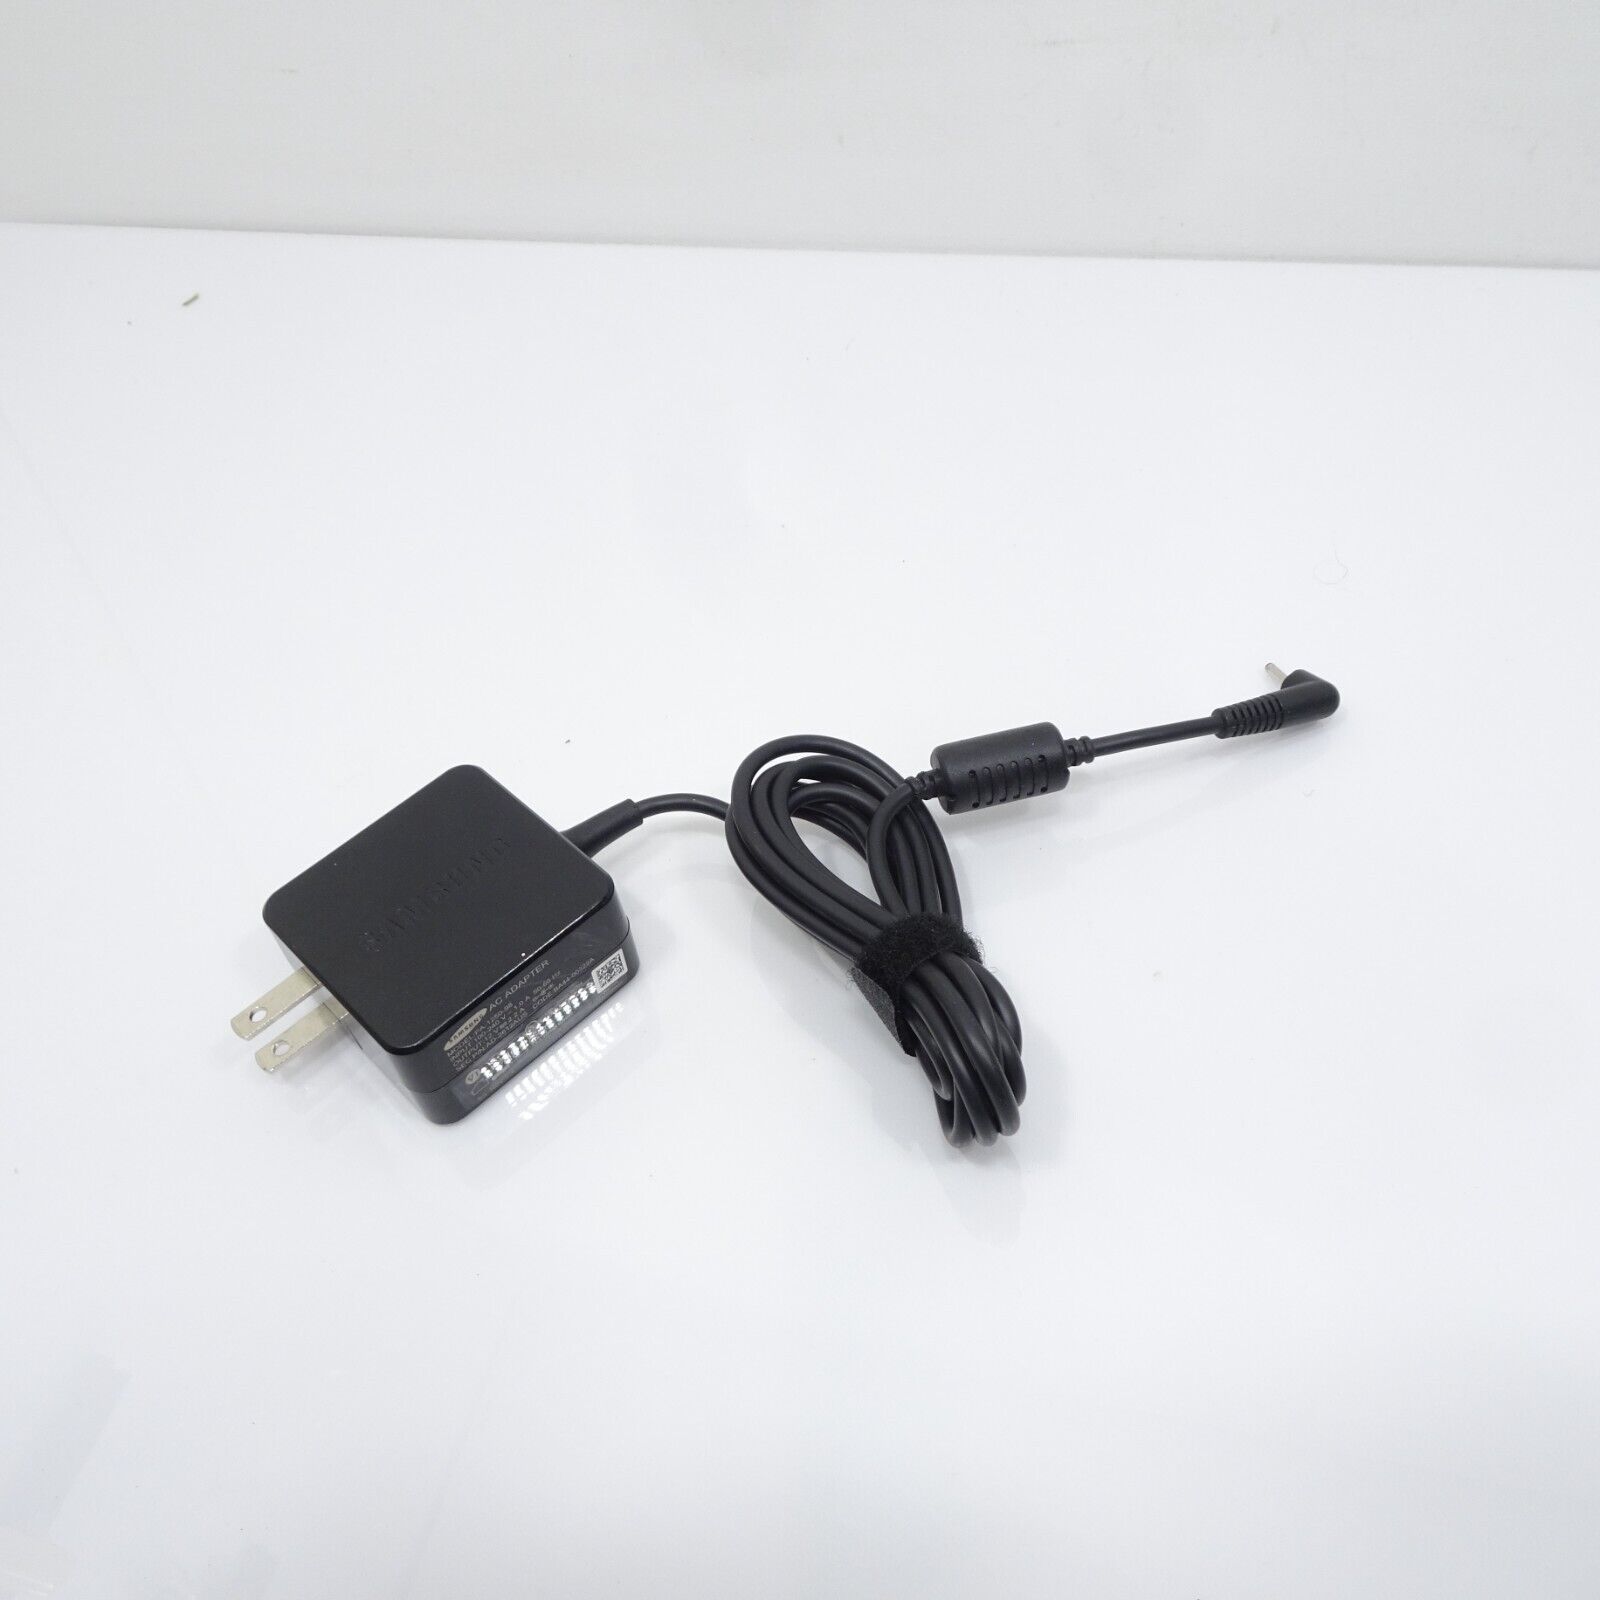 Genuine Samsung Chromebook Charger XE500C13 2 XE500C12 PA-1250-98 AC Adapter